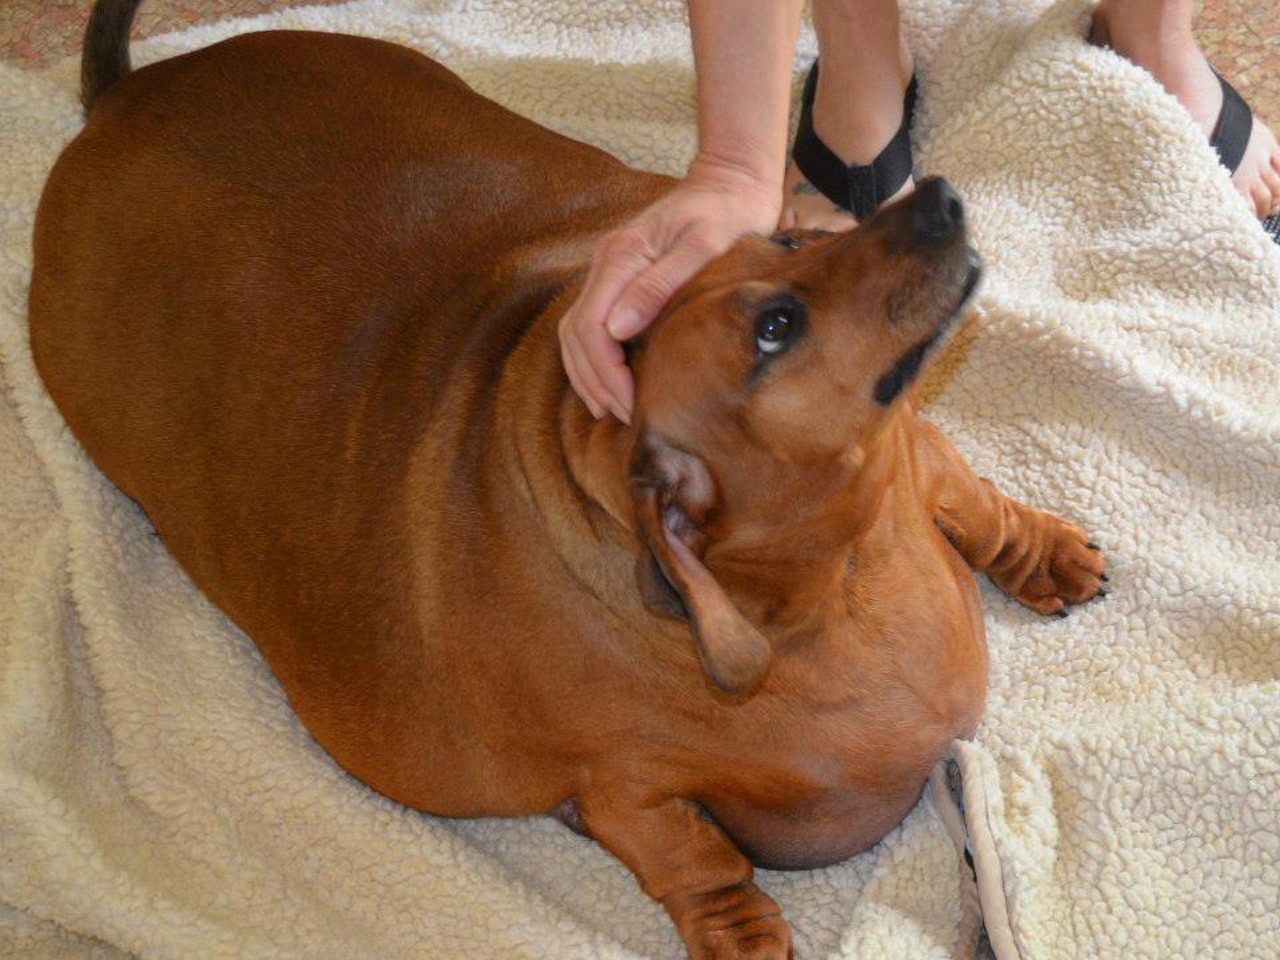 Obese dachshund's weight loss journey - Photo 1 - Pictures - CBS News